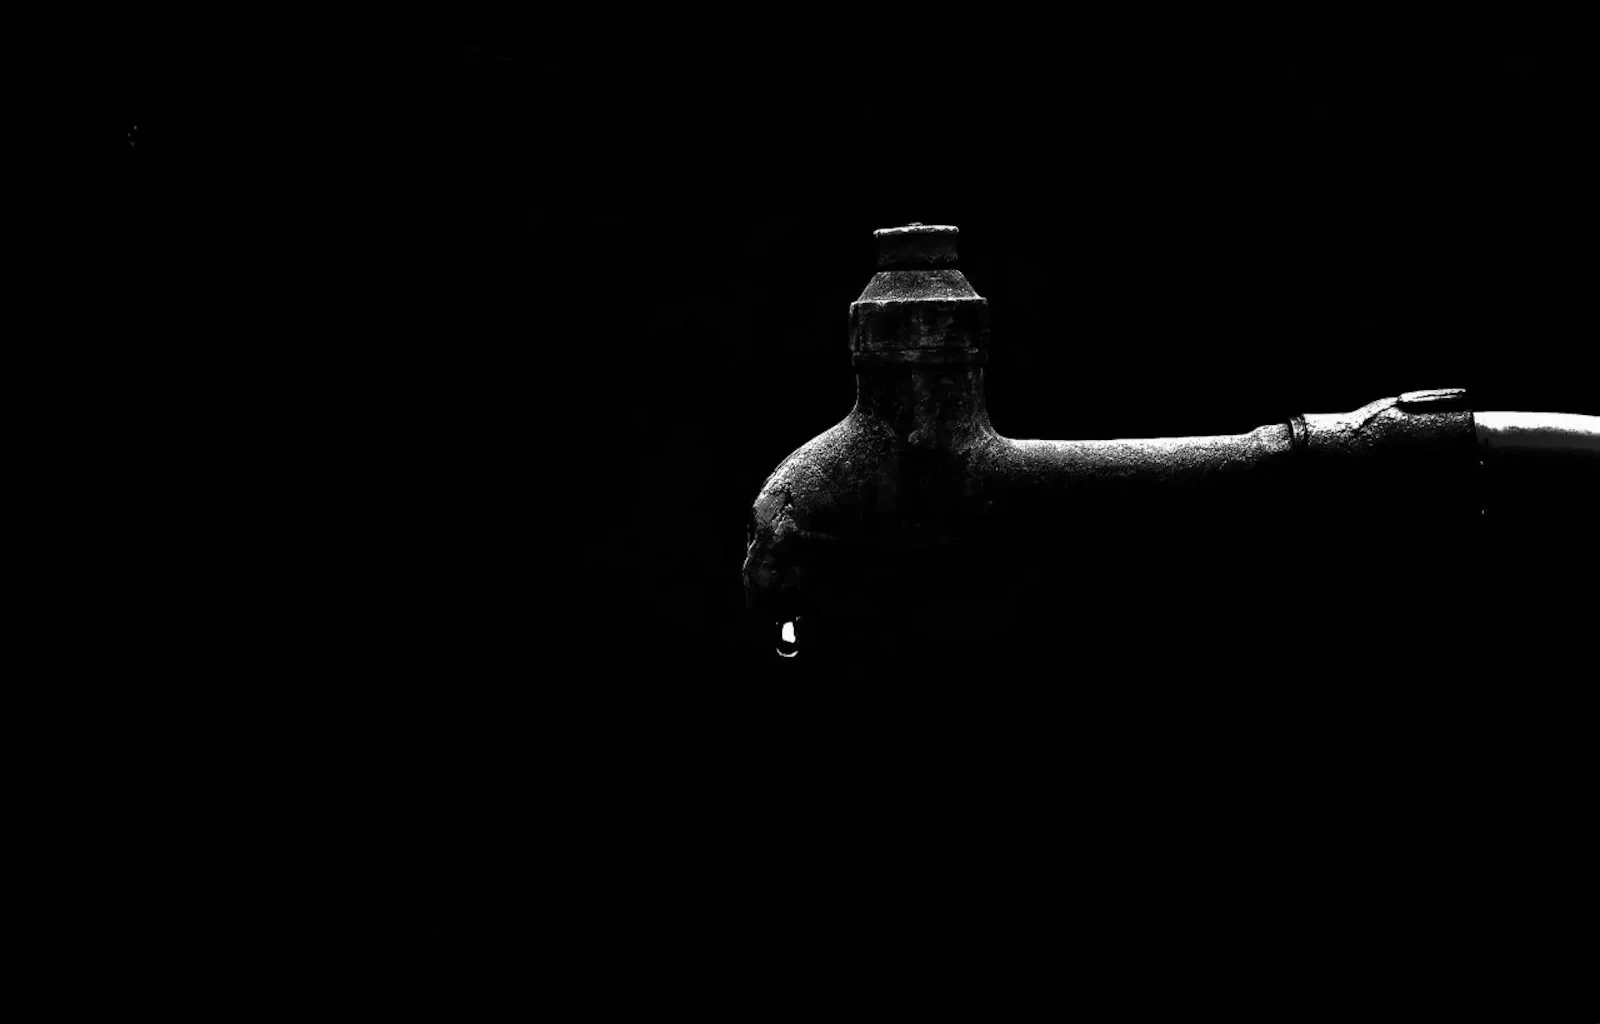 An evocative image of a hand holding a water faucet in black and white, symbolizing the battle between a thirst for love and a growing sense of disillusionment.